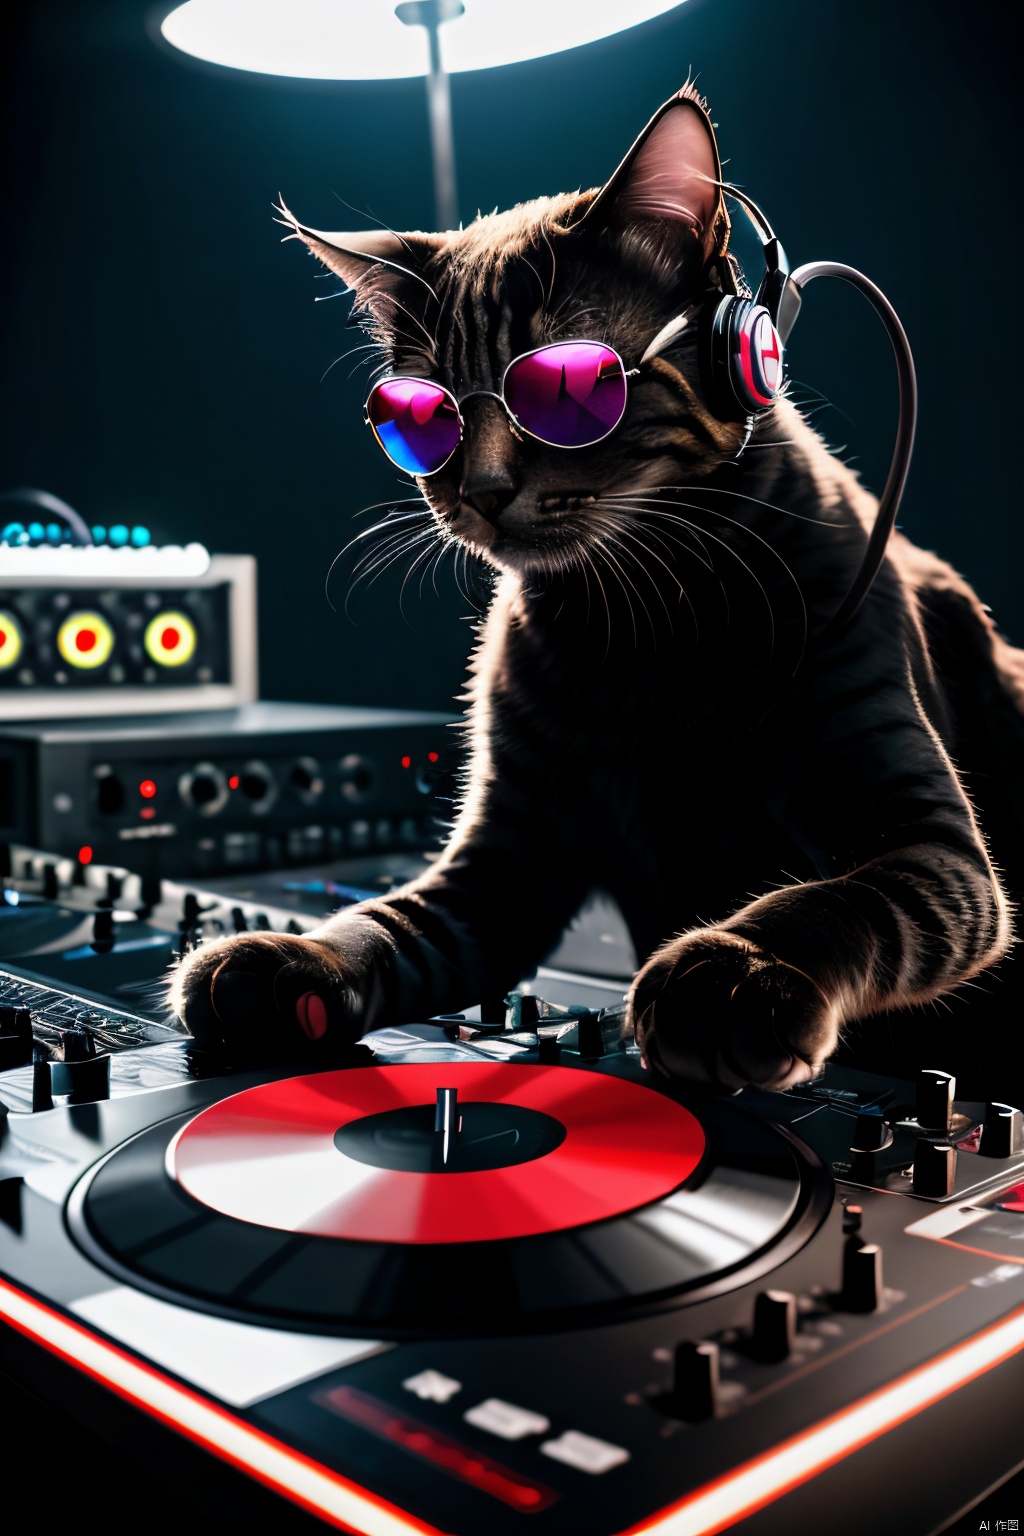  8k uhd rtx on cinematic artistic photoreal masterpiece best quality high resolution, A Cat DJ, wearing sunglasses and headphones, working the turntables as a DJ,